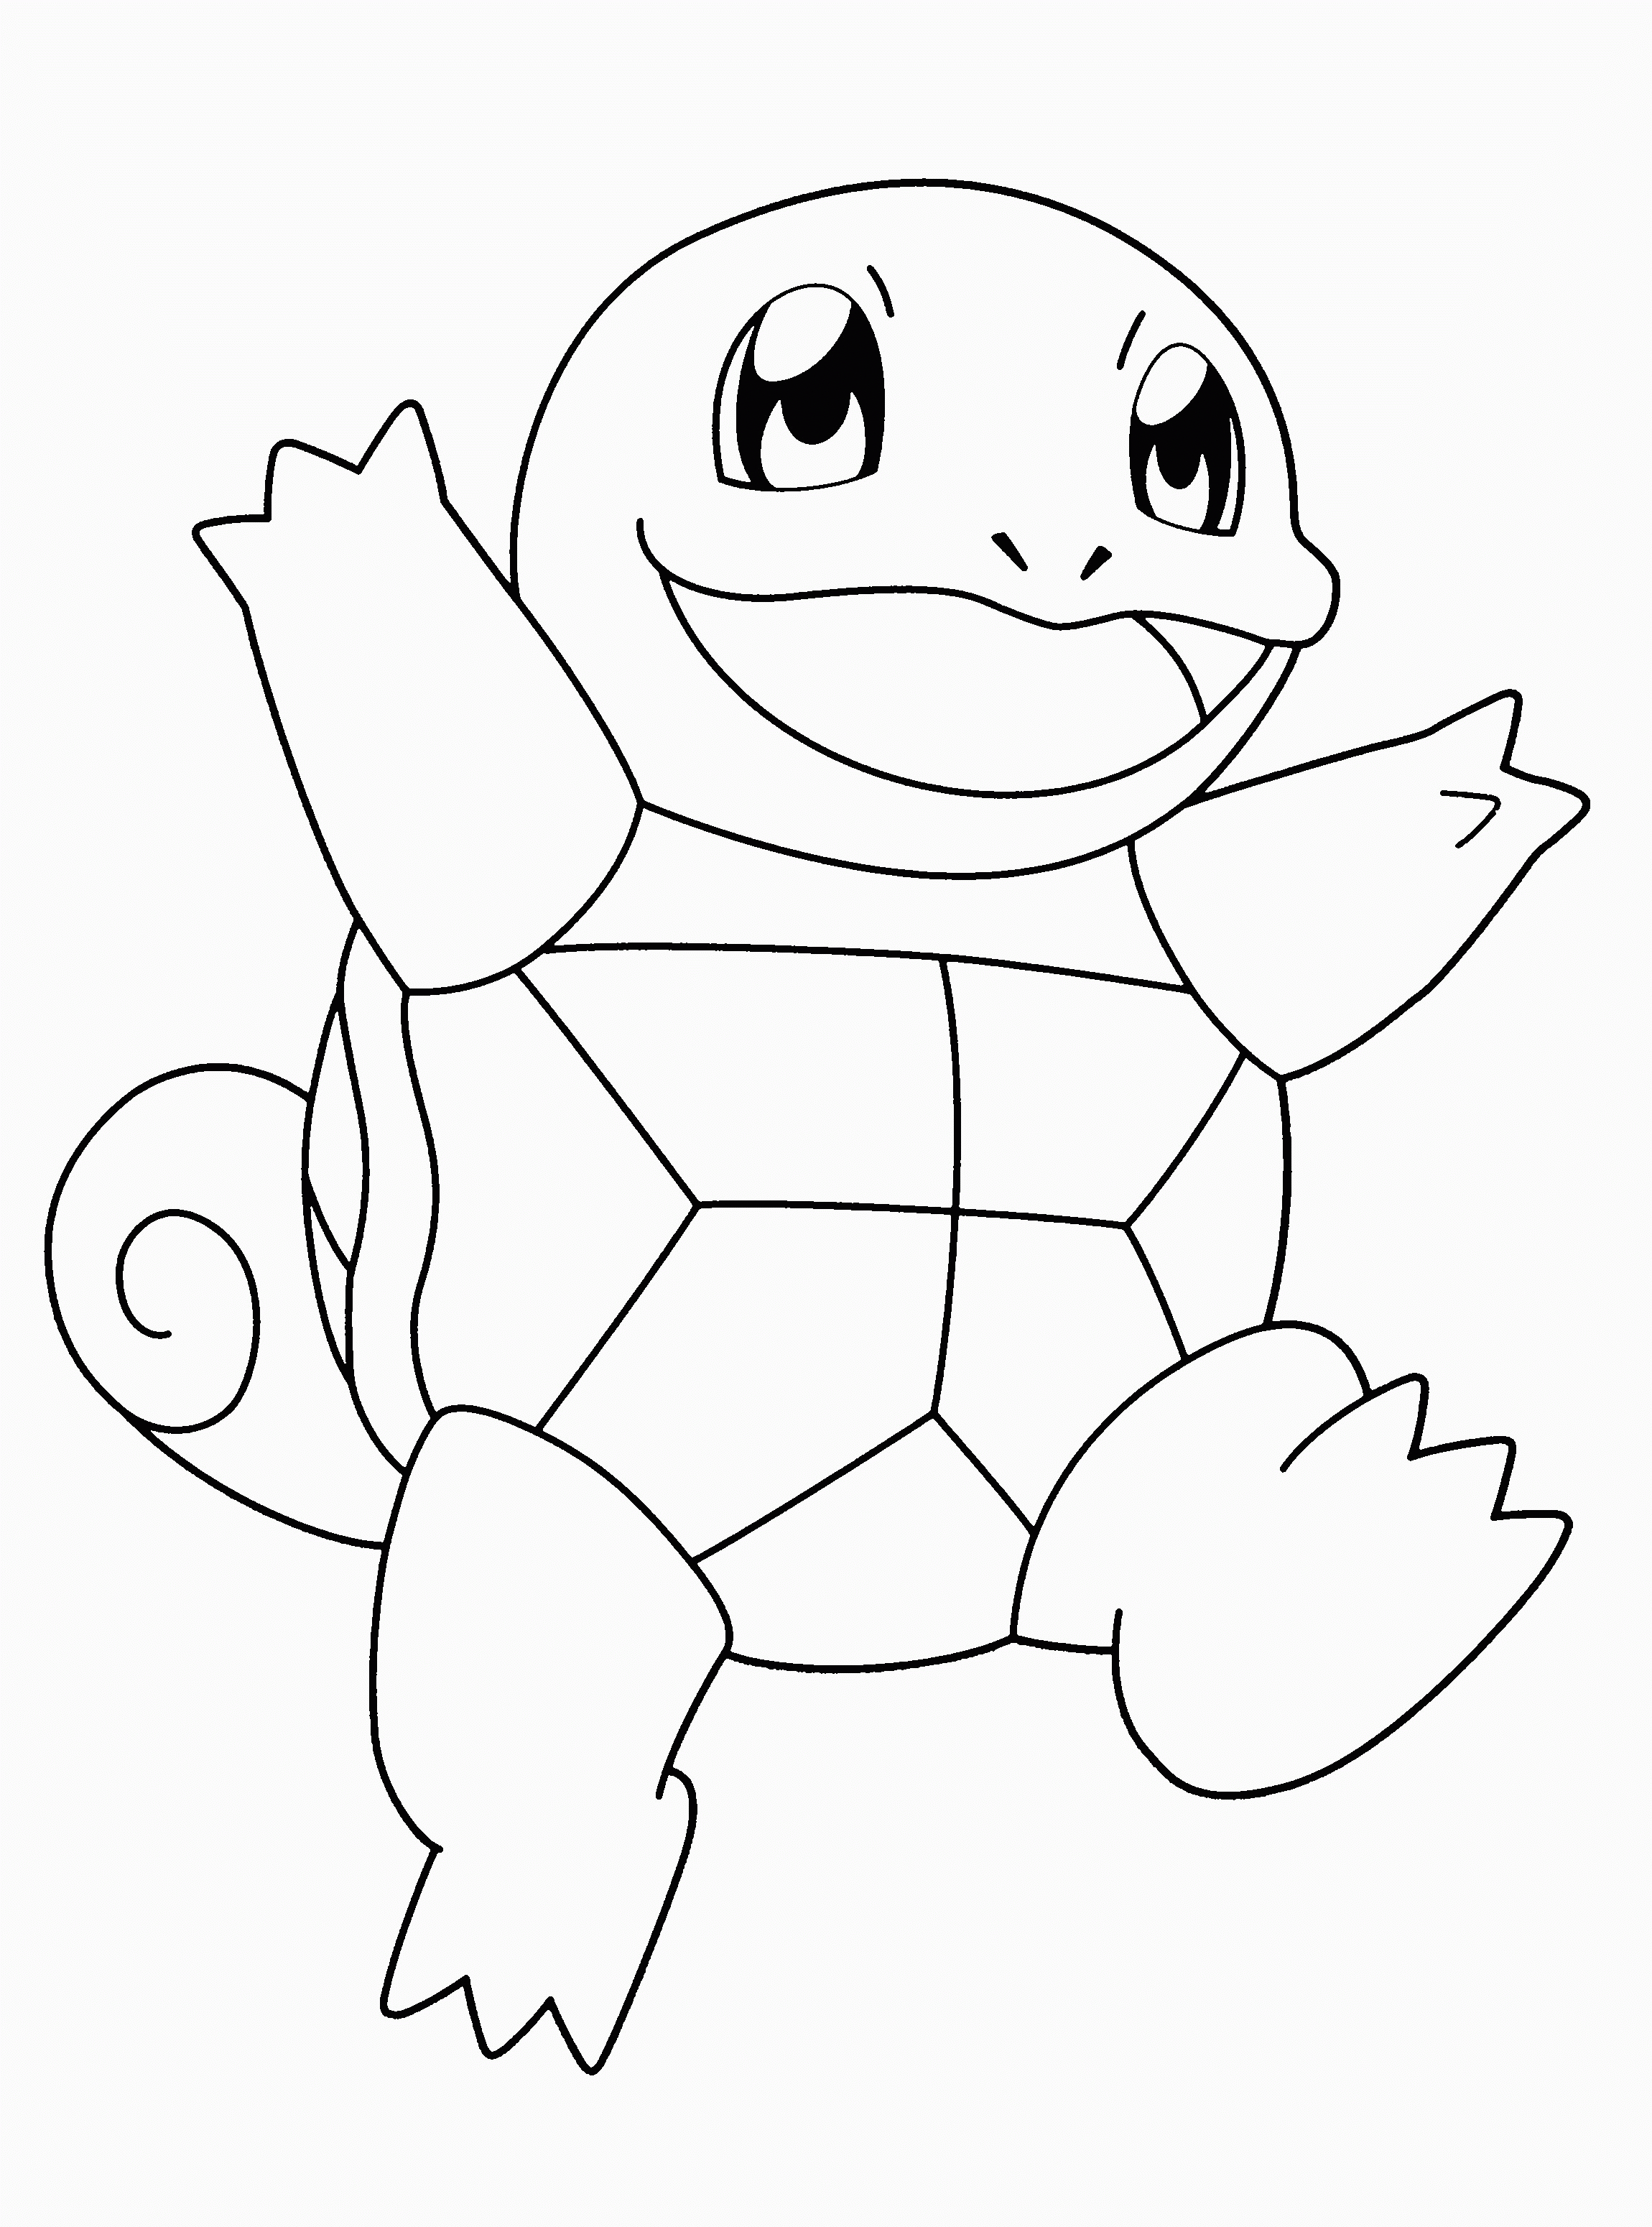 Free Printable Pokemon Coloring Pages 37 Pics How To For Pokemon - Free Printable Pokemon Coloring Pages